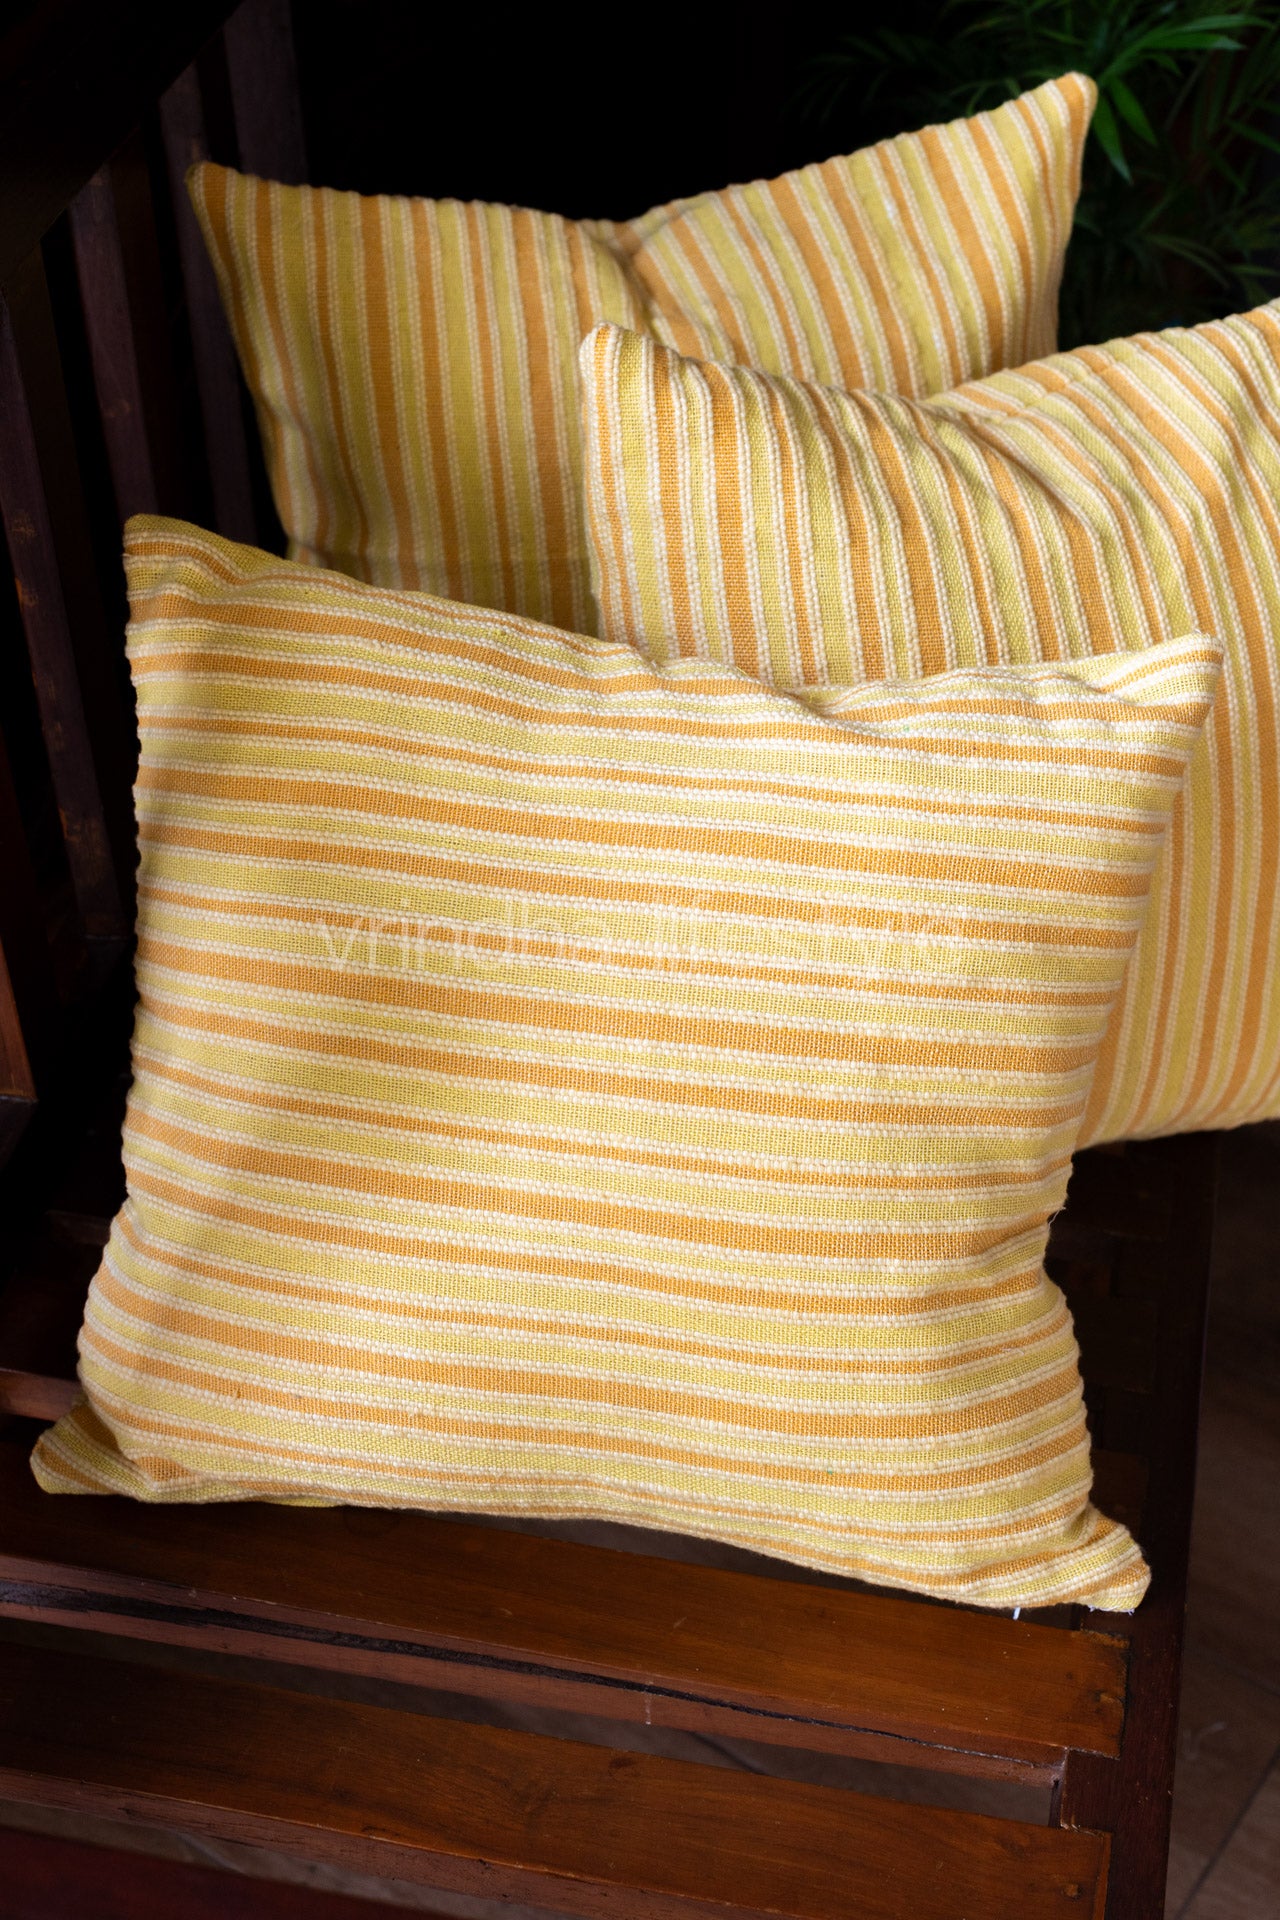 WOVEN STRIPES CUSHION COVERS-Set of two cushion covers